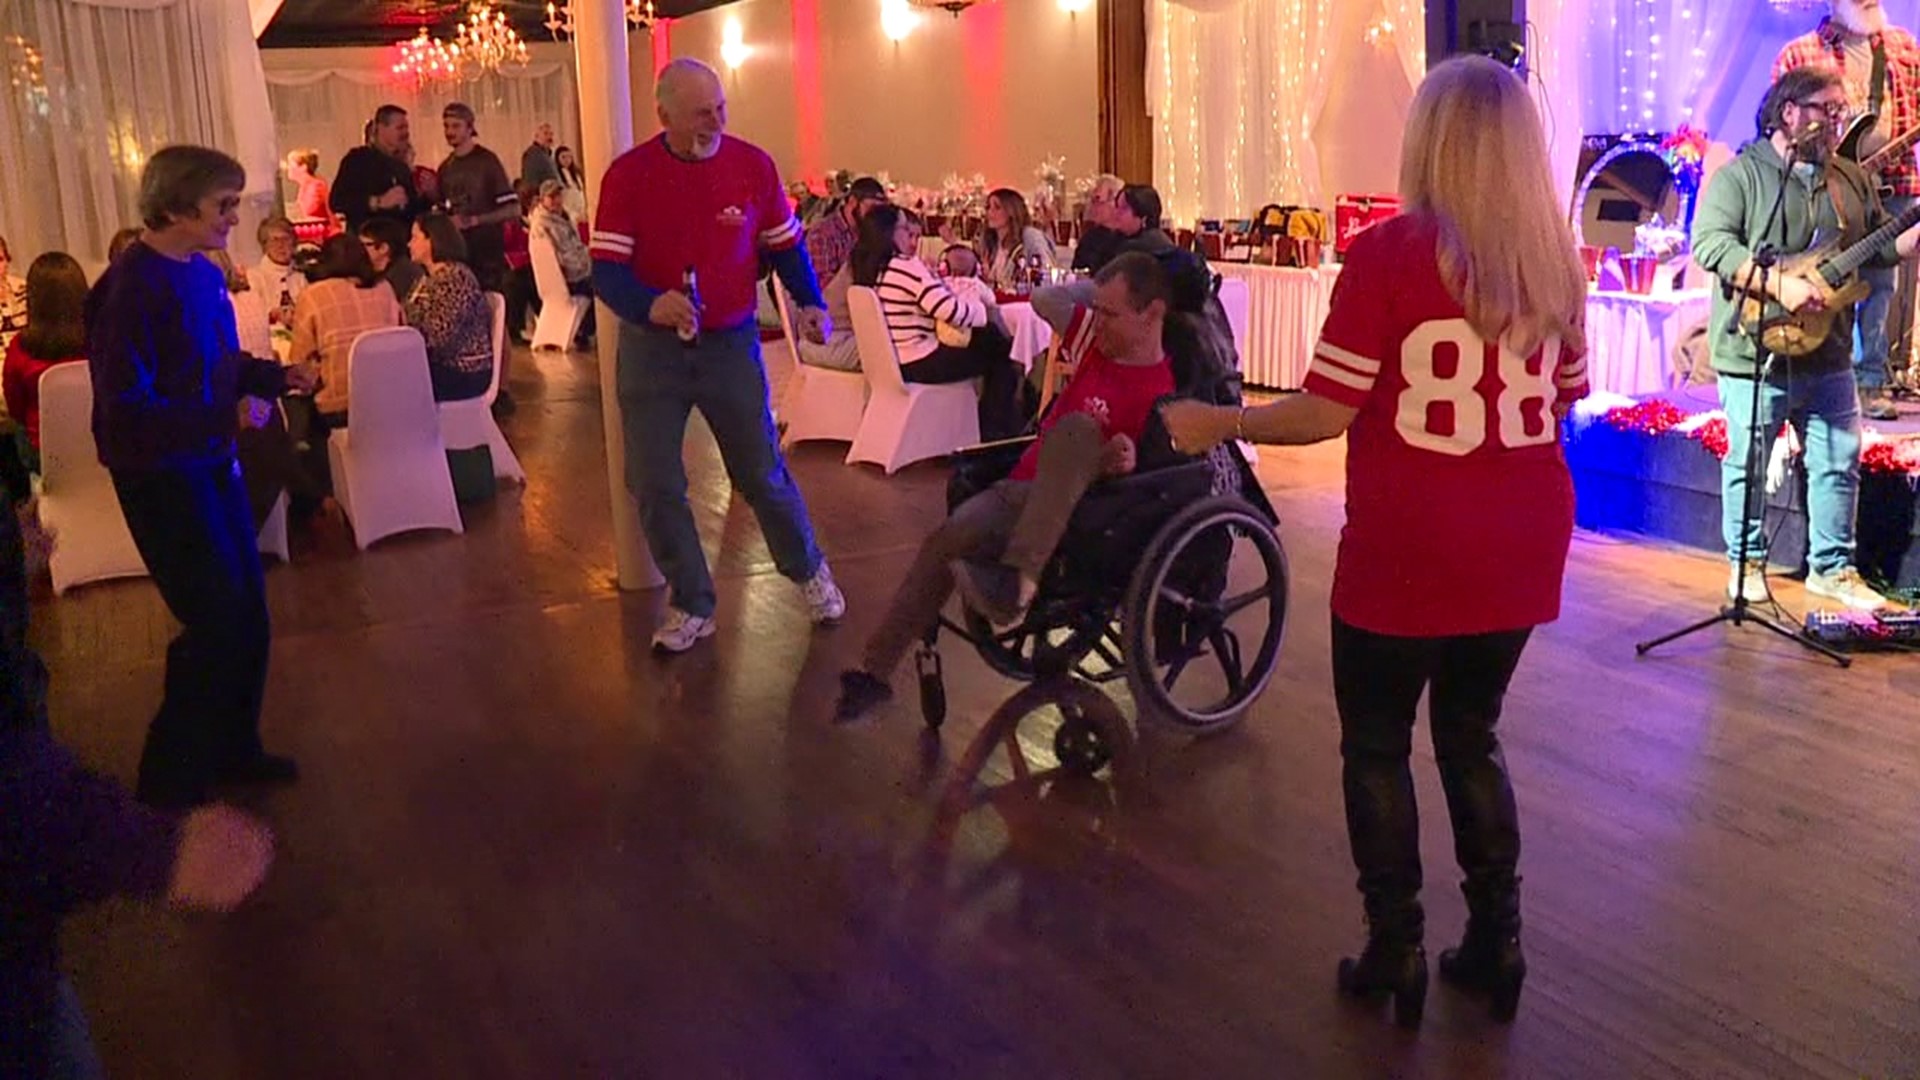 Folks in Lackawanna County came together Saturday night to help support the Saint Joseph's Center.